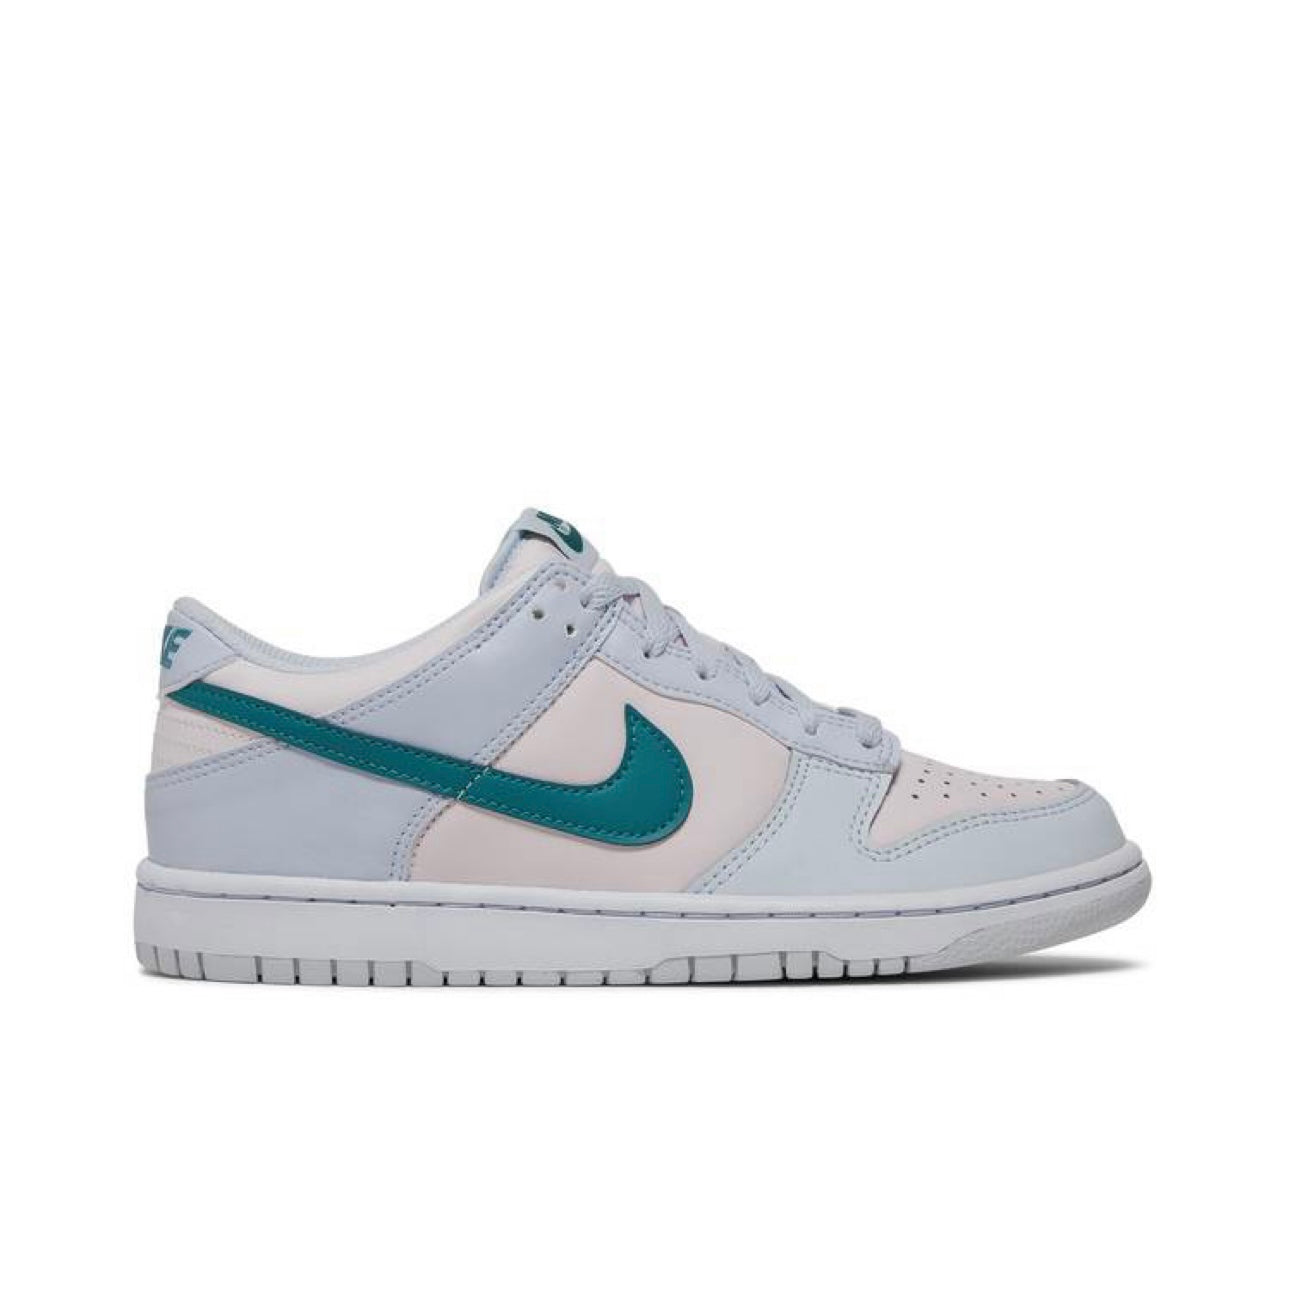 Nike Dunk Low ‘Mineral Teal’ (Women’s)